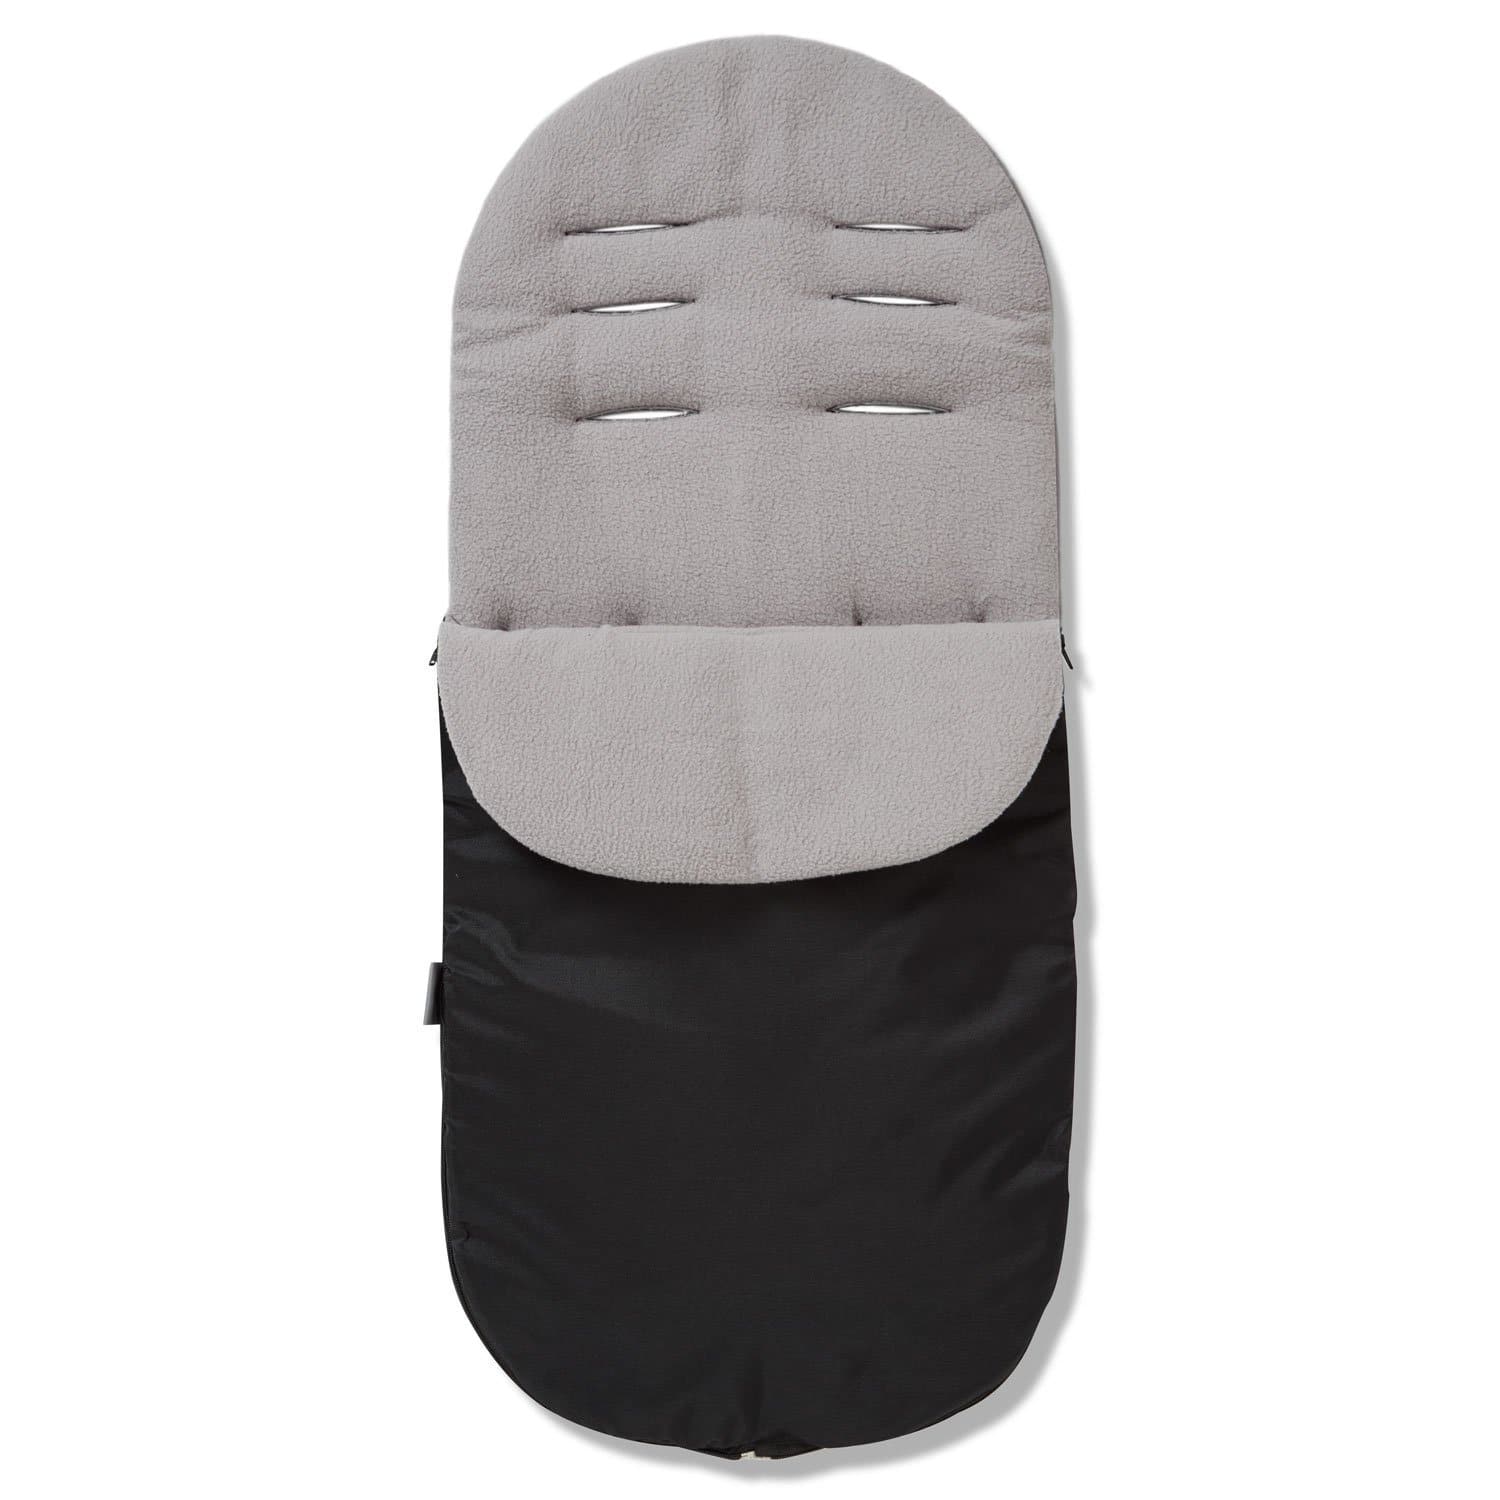 Footmuff / Cosy Toes Compatible with Kids Kargo - Grey / Fits All Models | For Your Little One